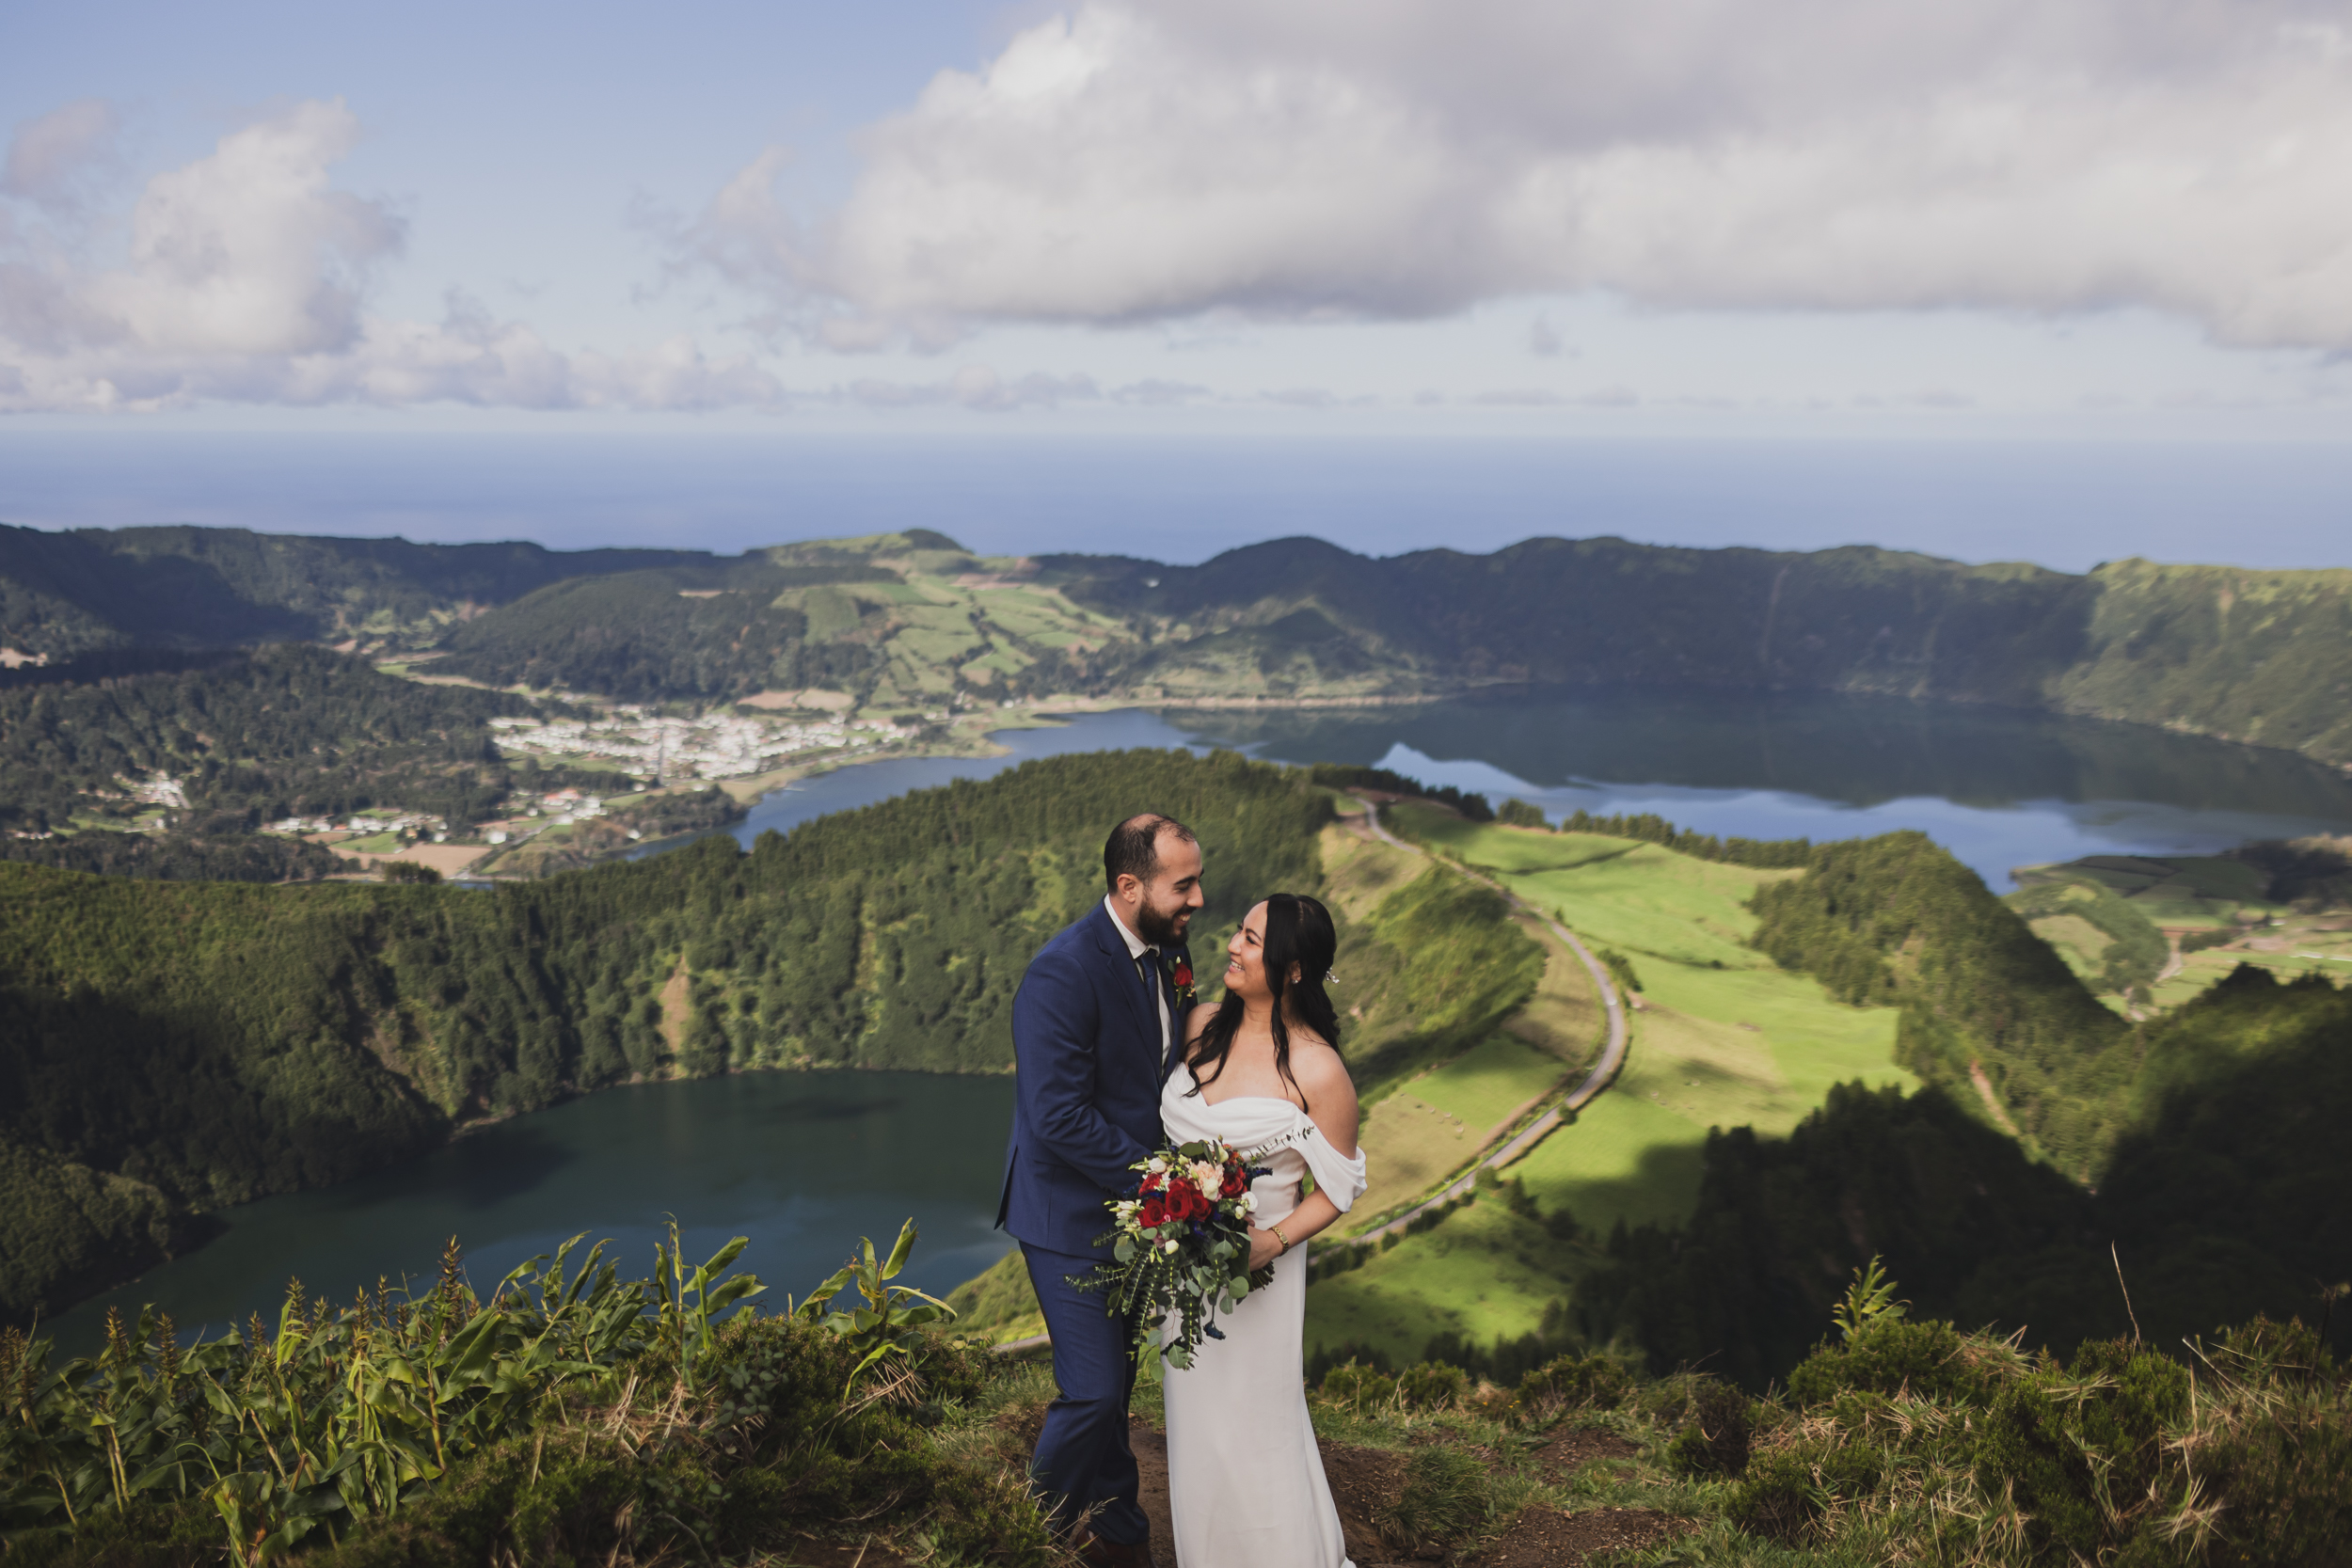 Ambiance Weddings Azores - Destination Weddings in Azores